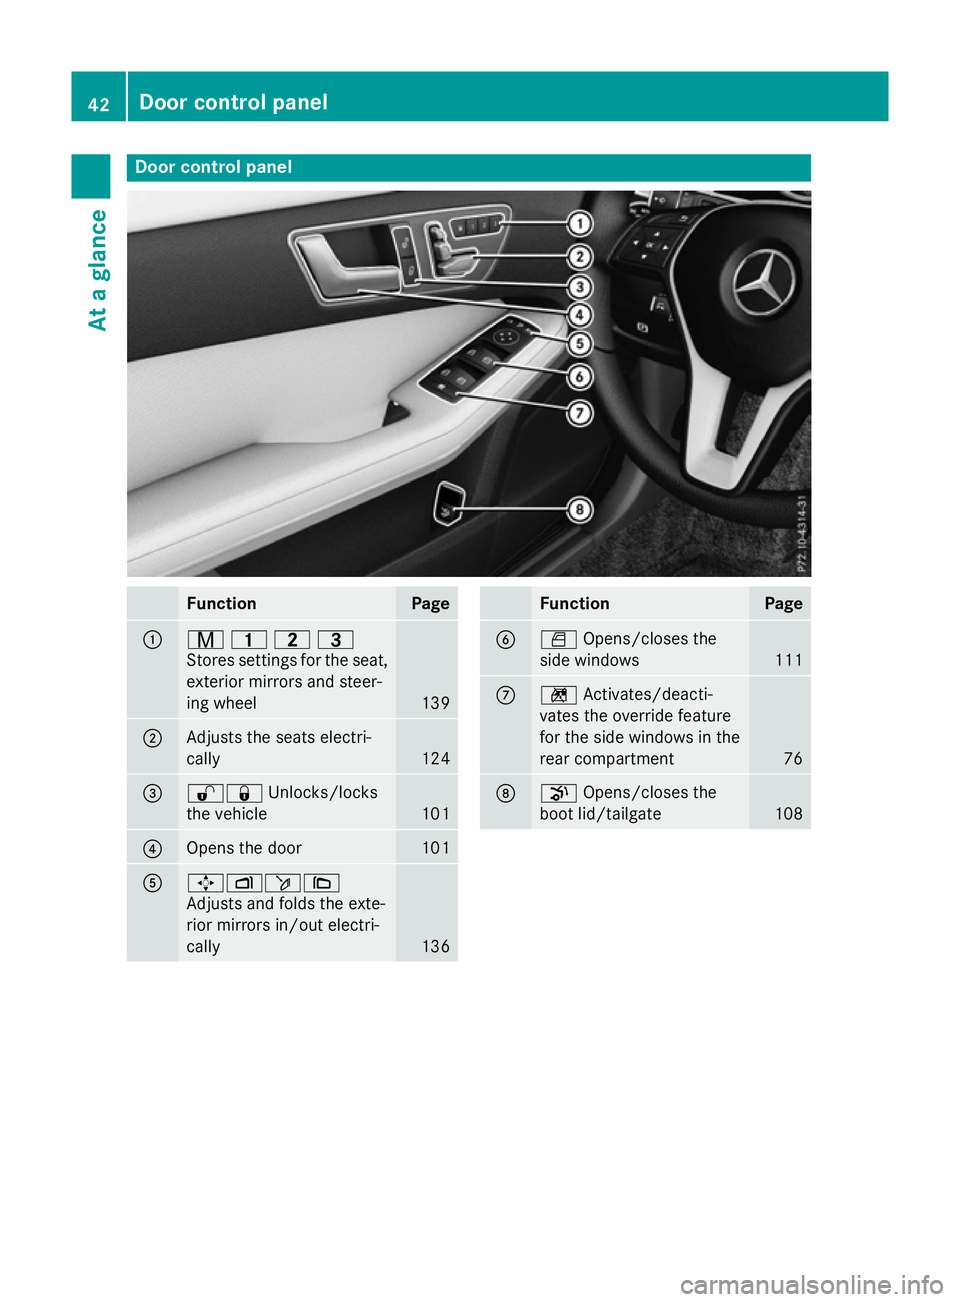 MERCEDES-BENZ E-CLASS ESTATE 2015 Service Manual Door contro
lpanel Function Page
:
r
45=
Store ssettings for the seat,
exterio rmirrors and steer-
ing wheel 139
;
Adjusts the seats electri-
cally
124
=
%&
Unlocks/locks
the vehicle 101
?
Opens the d